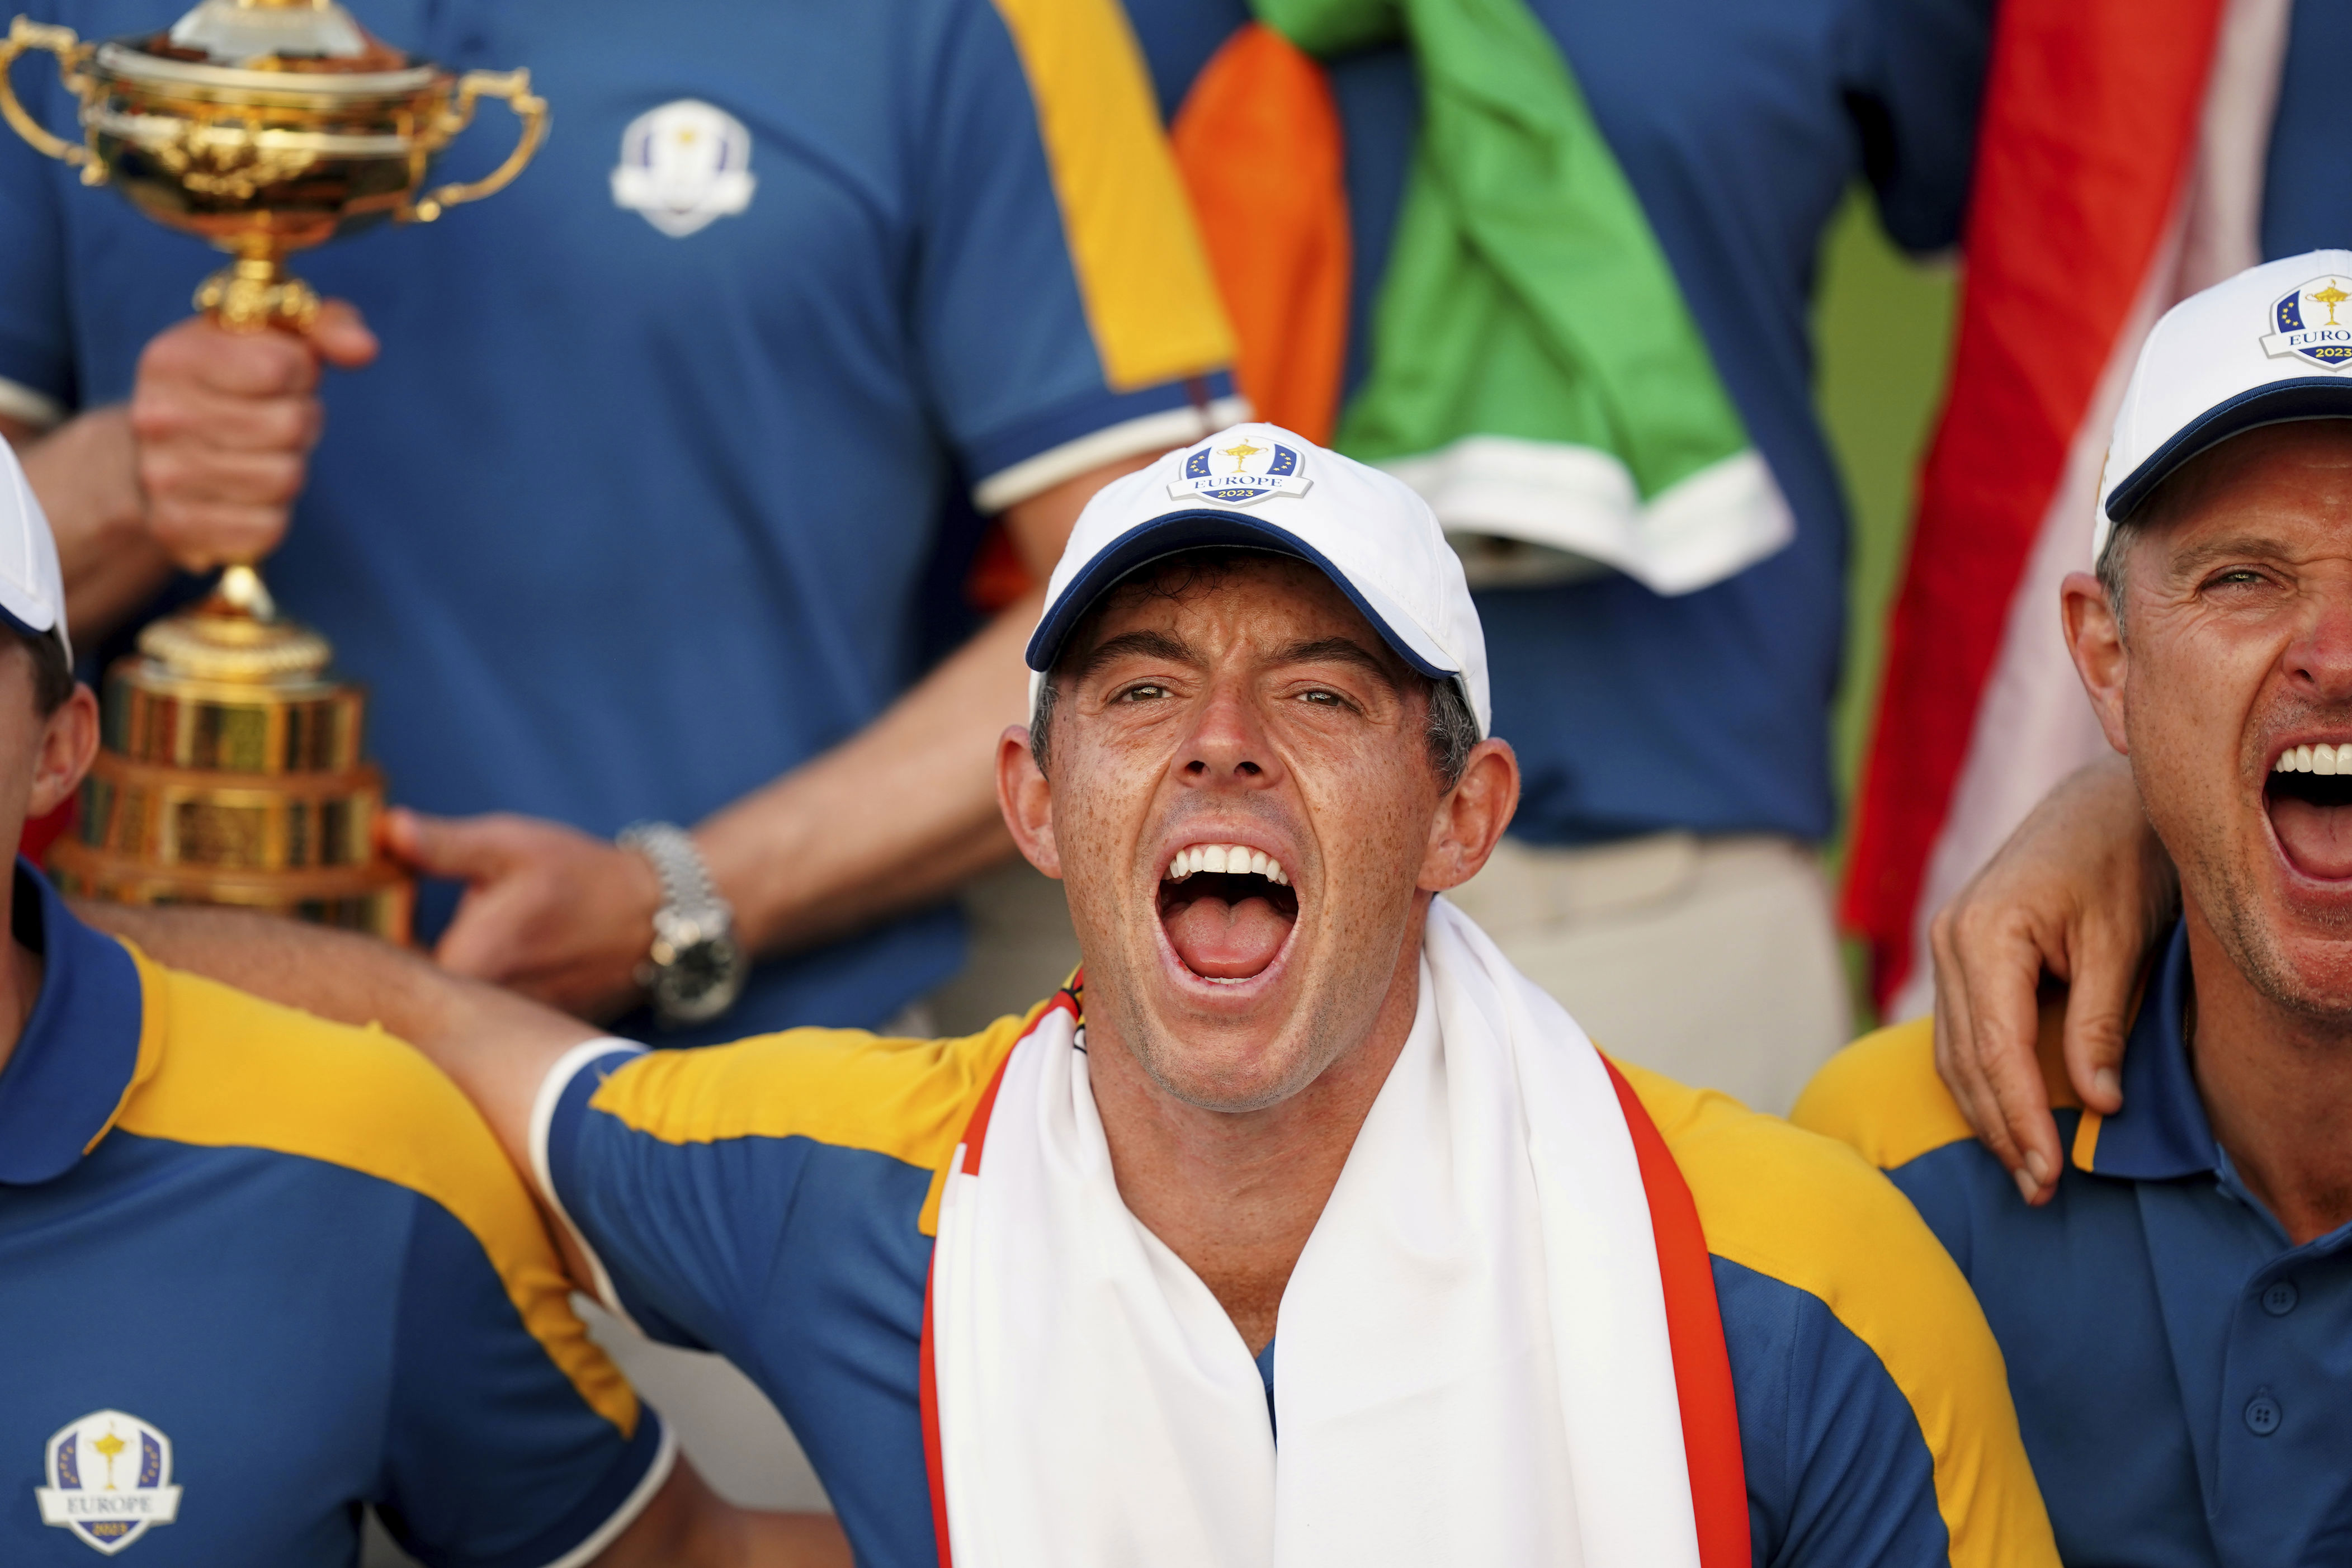 Rory McIlroy gets philosophical during Ryder Cup controversy, leads ...